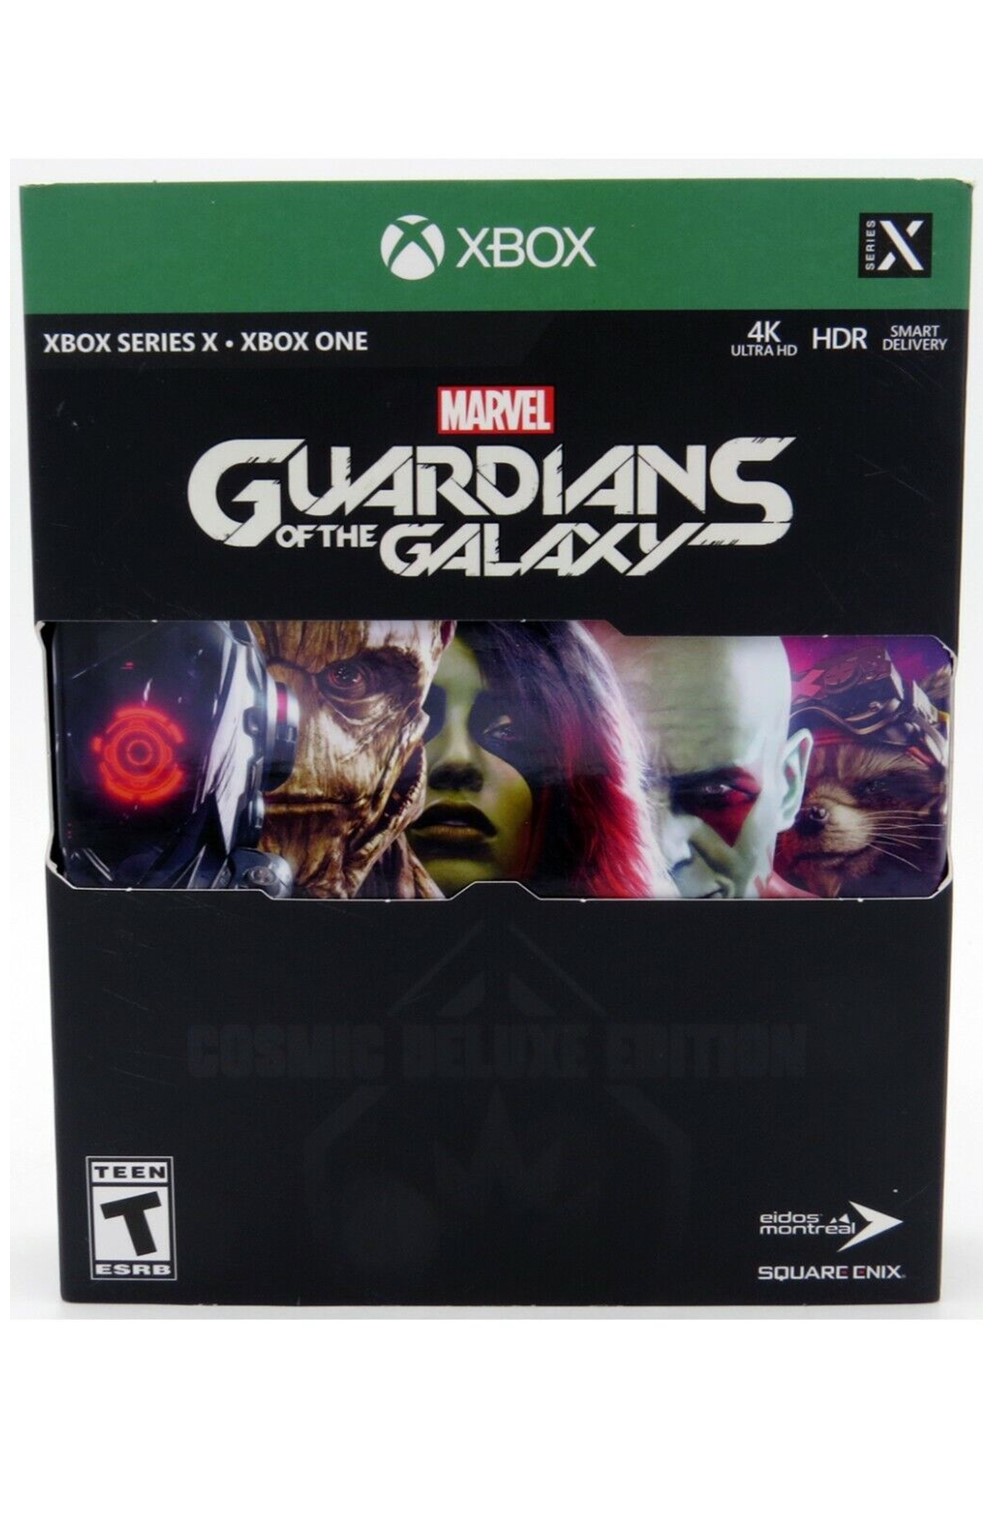 Xbox Series X Xbox One Xb1 Guardians of the Galaxy Cosmic Deluxe Edition